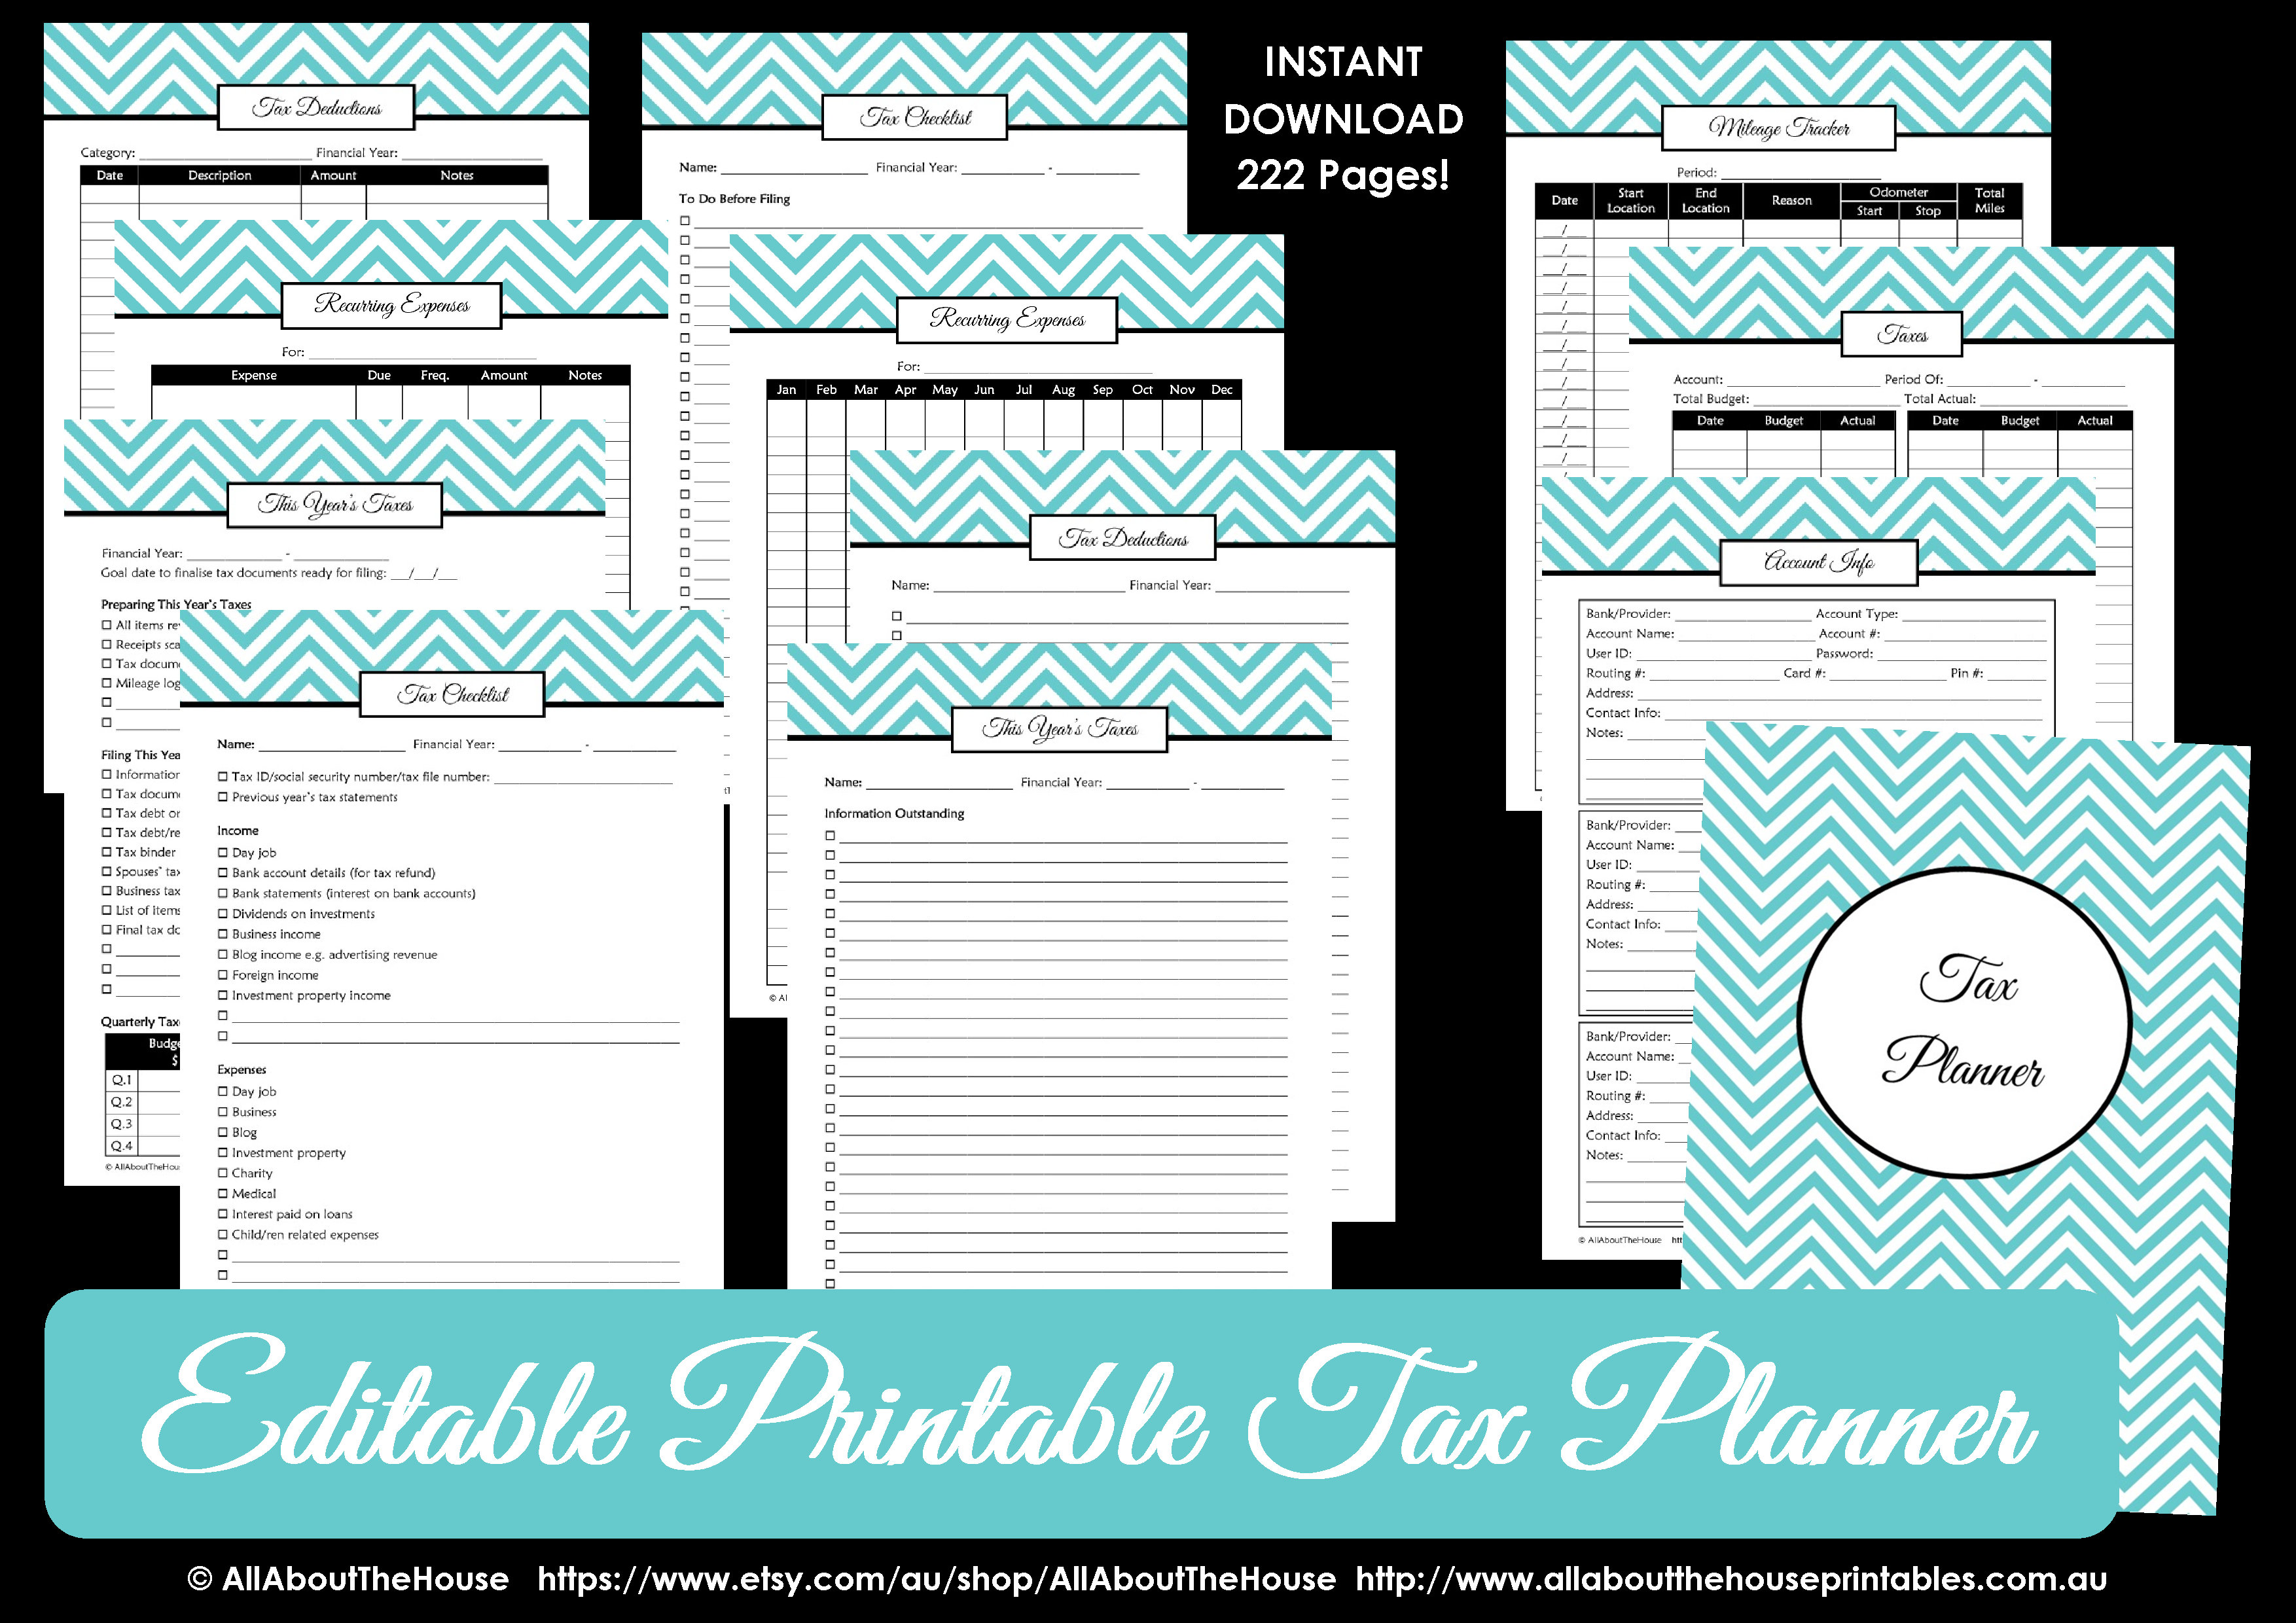 How to organize your taxes with a printable tax planner